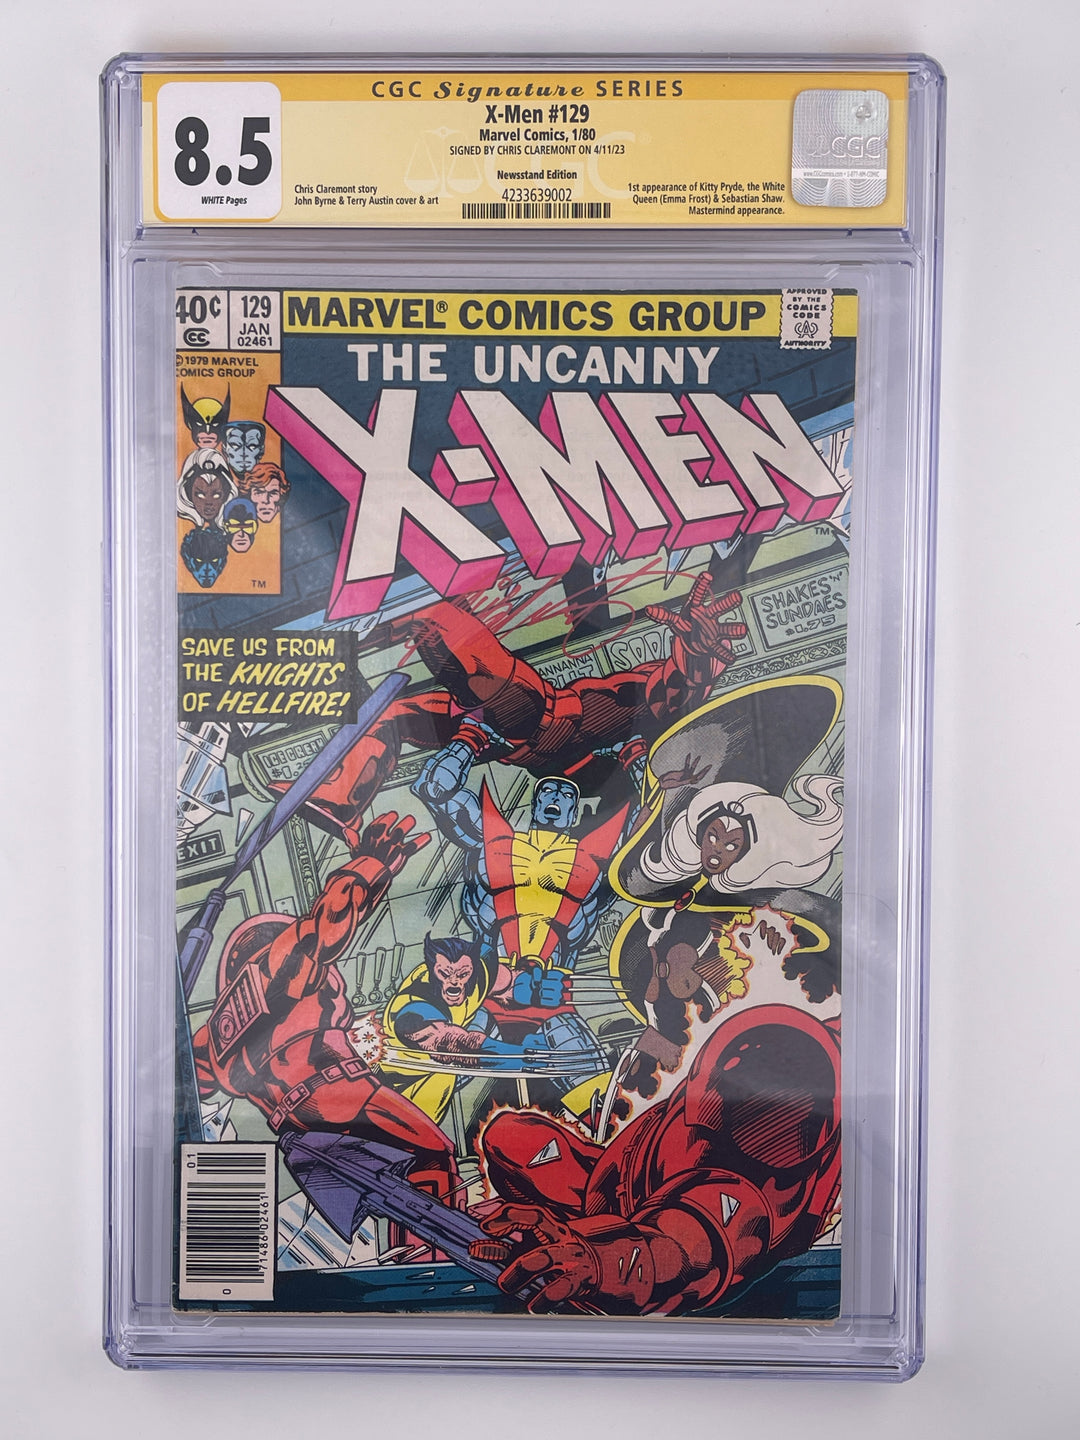 X-Men #129, CGC 8.5, 1st app Kitty Pride, Emma Front, Signed by Claremont